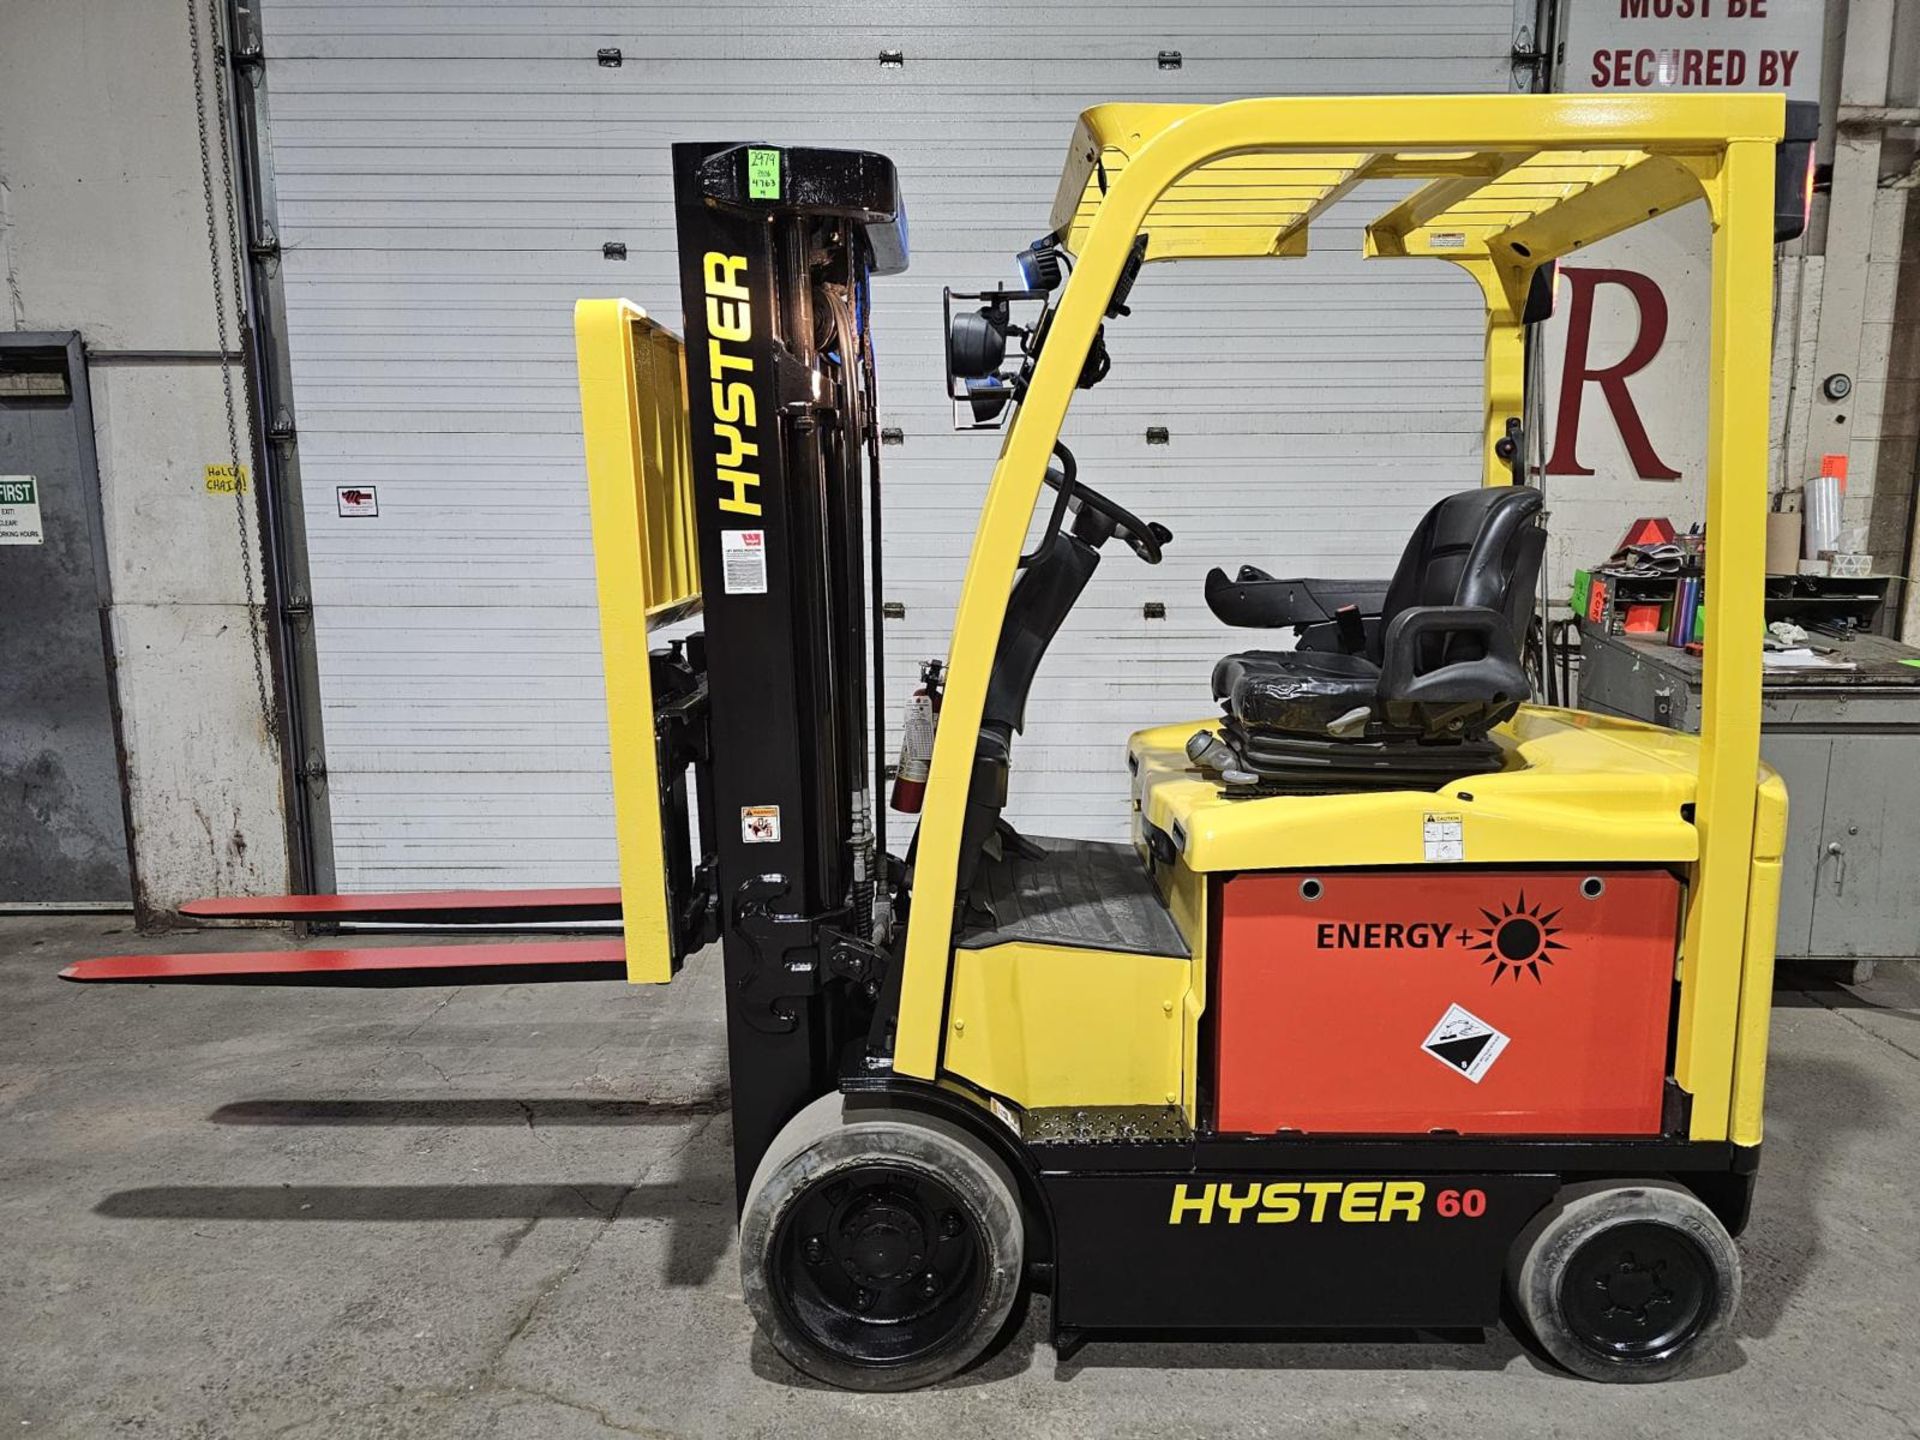 2015 Hyster 5,000lbs Capacity LPG (Propane) Forklift with sideshift & 3-STAGE MAST & Non marking